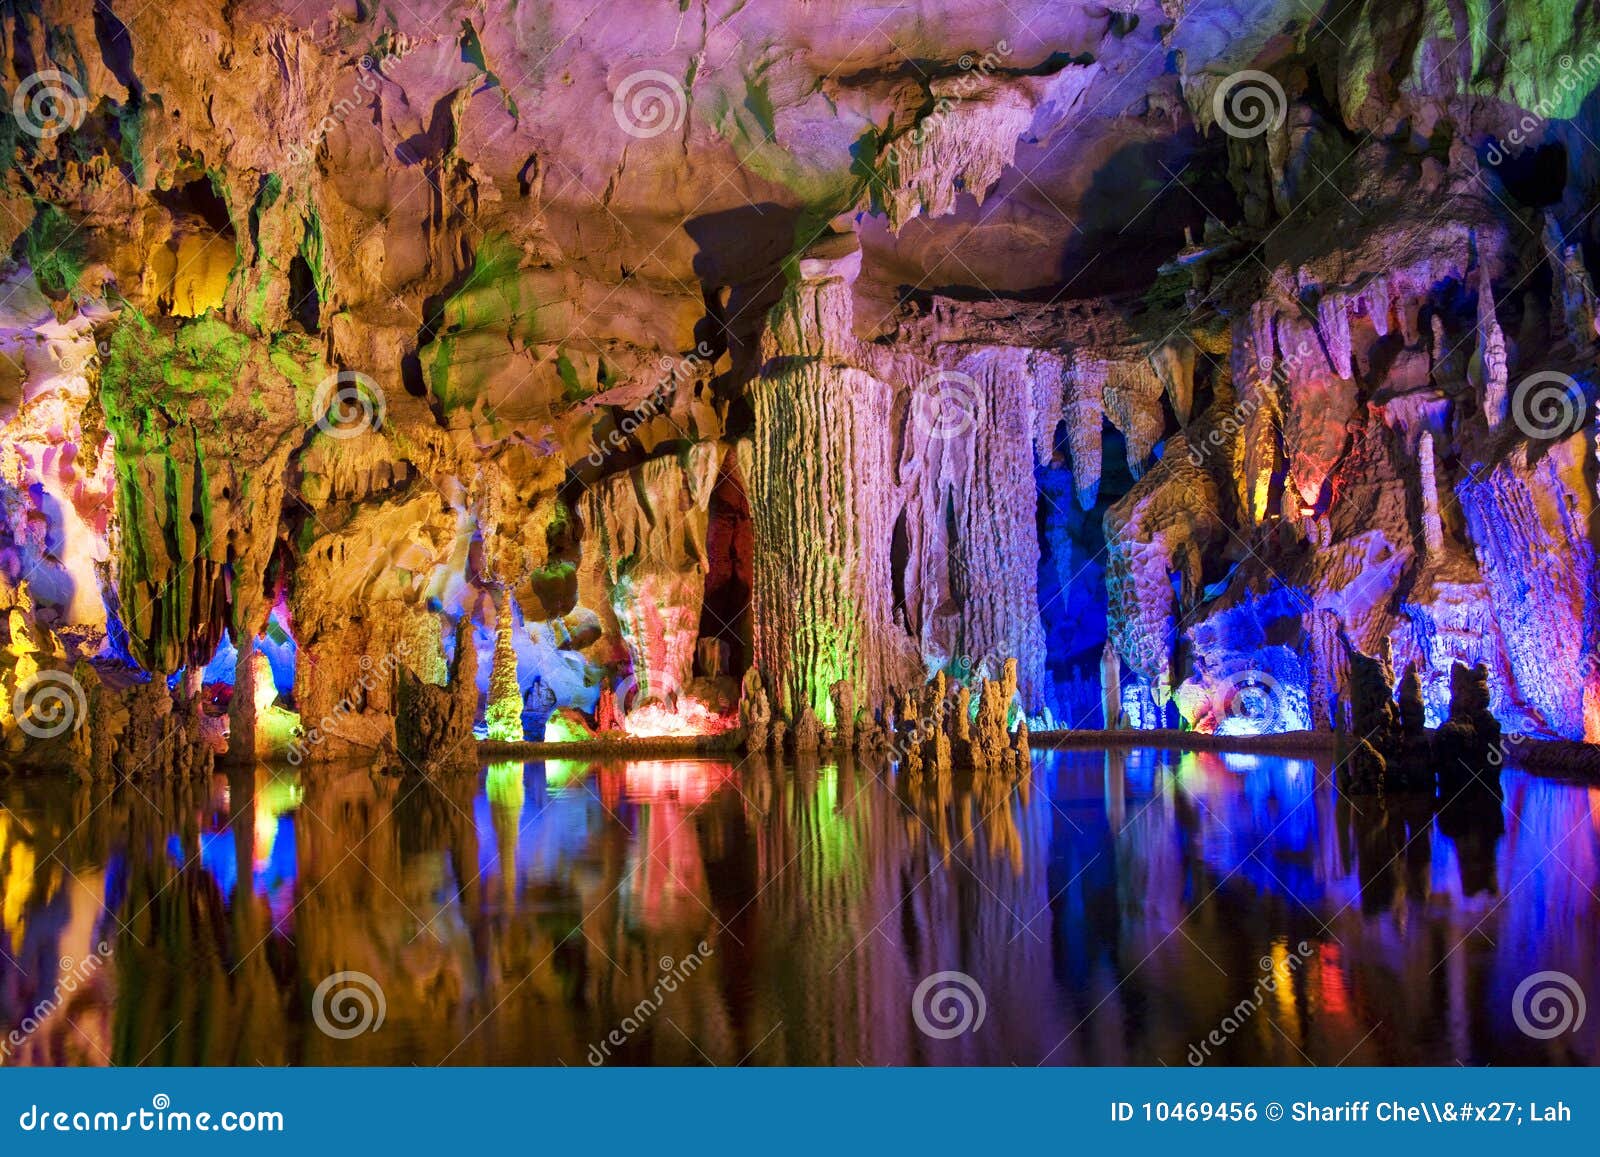 stalactite and stalagmite formations